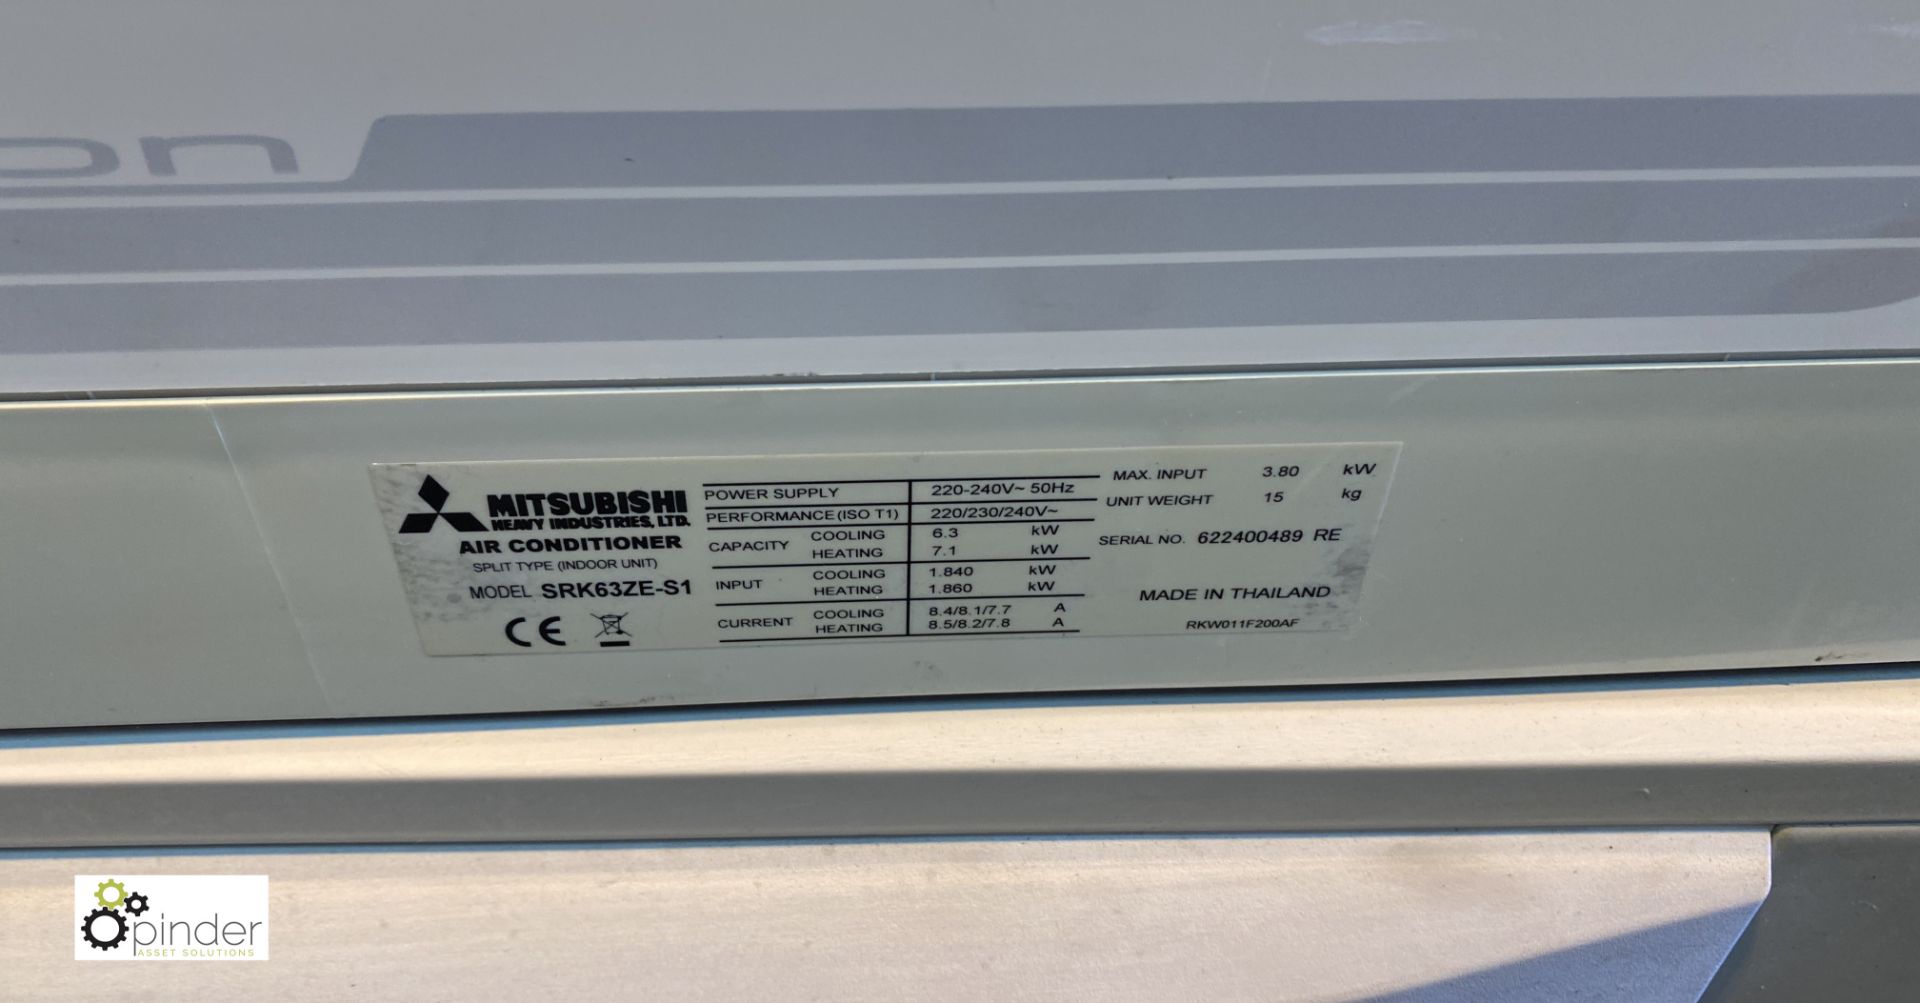 Mitsubishi SRC63ZE-S1 Air Conditioning Unit, with Mitsubishi SRK63ZE-S wall mounted inverter - Image 3 of 5